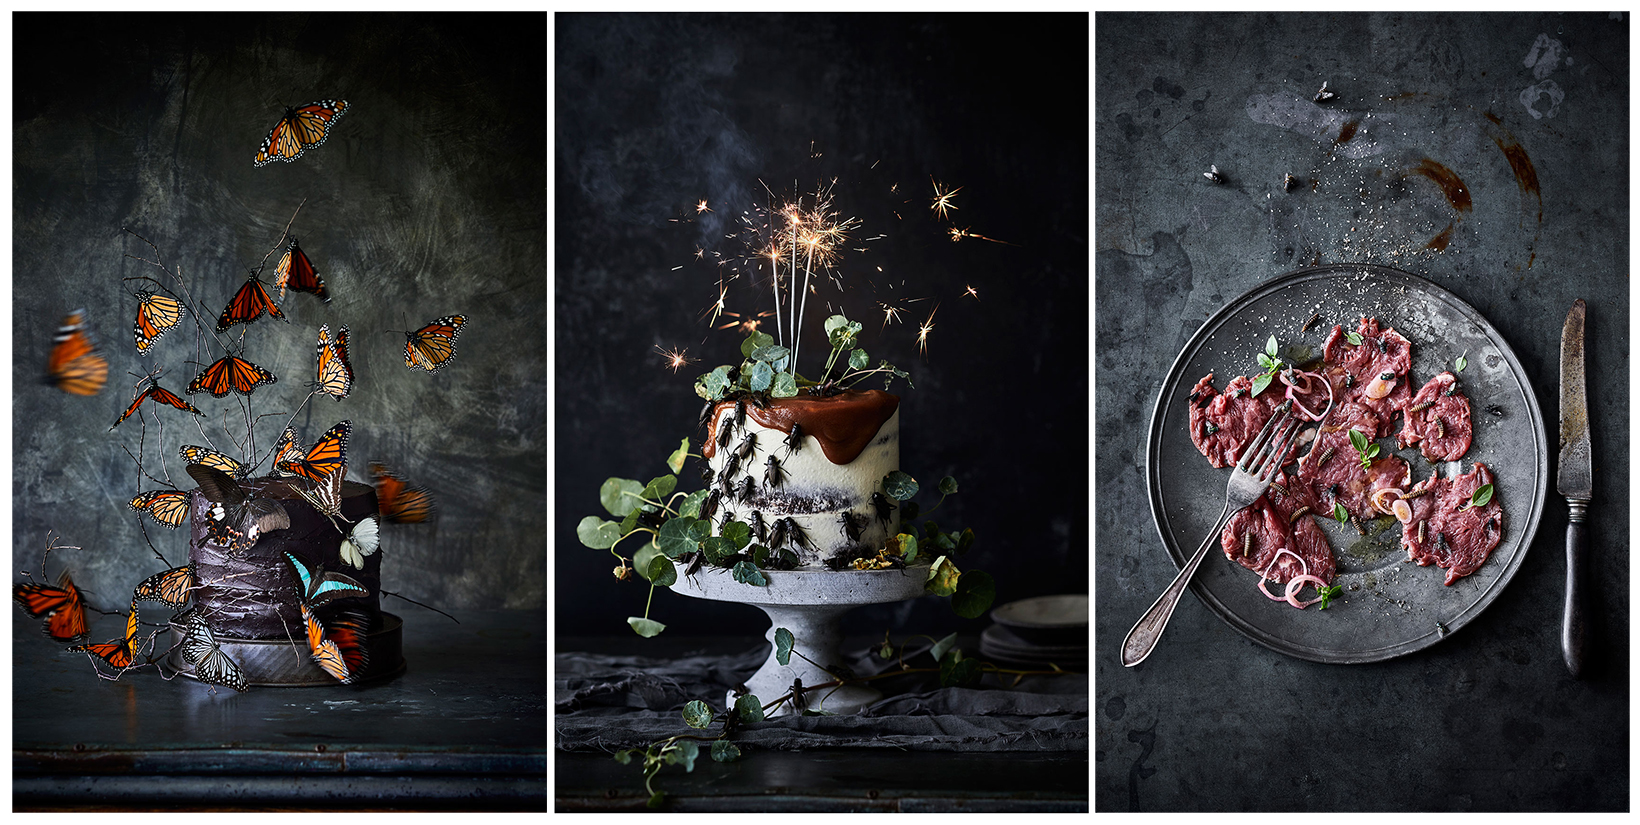 Bug Project 2.0 Cricket Cake・PX3 Award・Advertising & Fine Art Food Photography